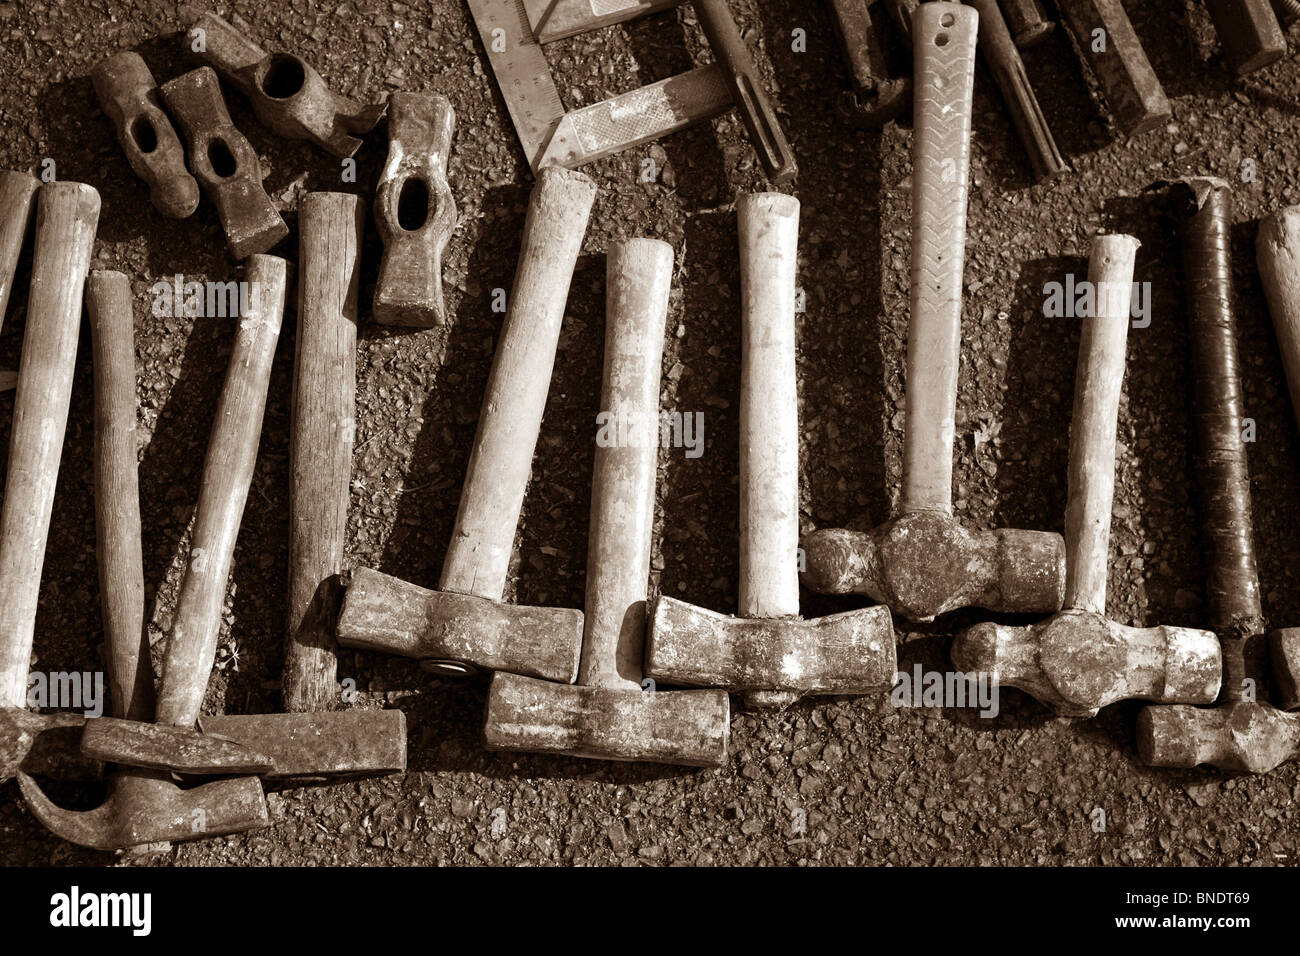 hammer hand tools hand tools collection pattern aged vintage Stock Photo